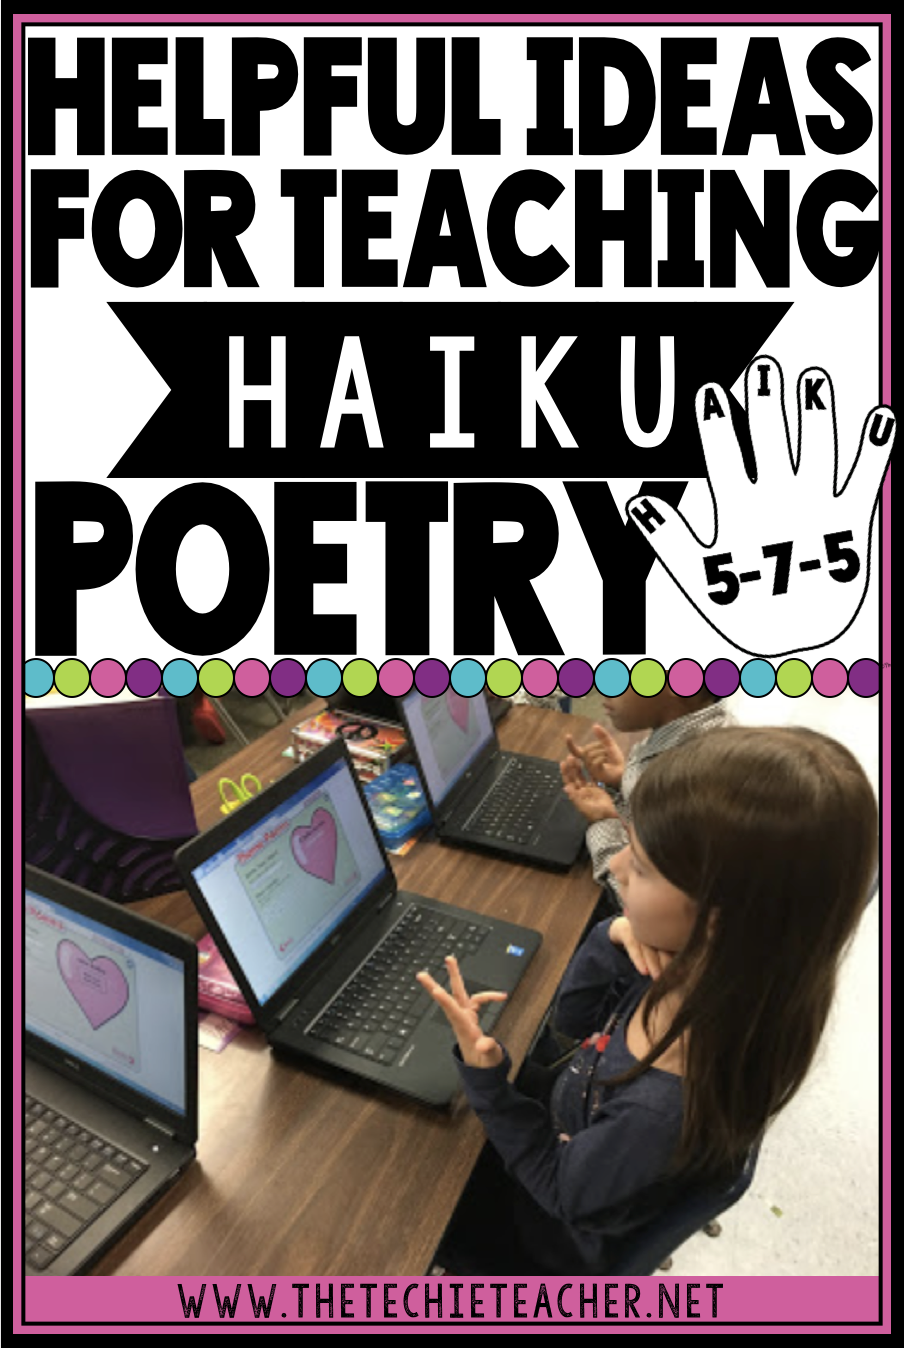 Learn about some helpful ways for teaching haiku poetry in the elementary classroom. Free visuals and writing templates can be downloaded. Technology integration ideas are also included!